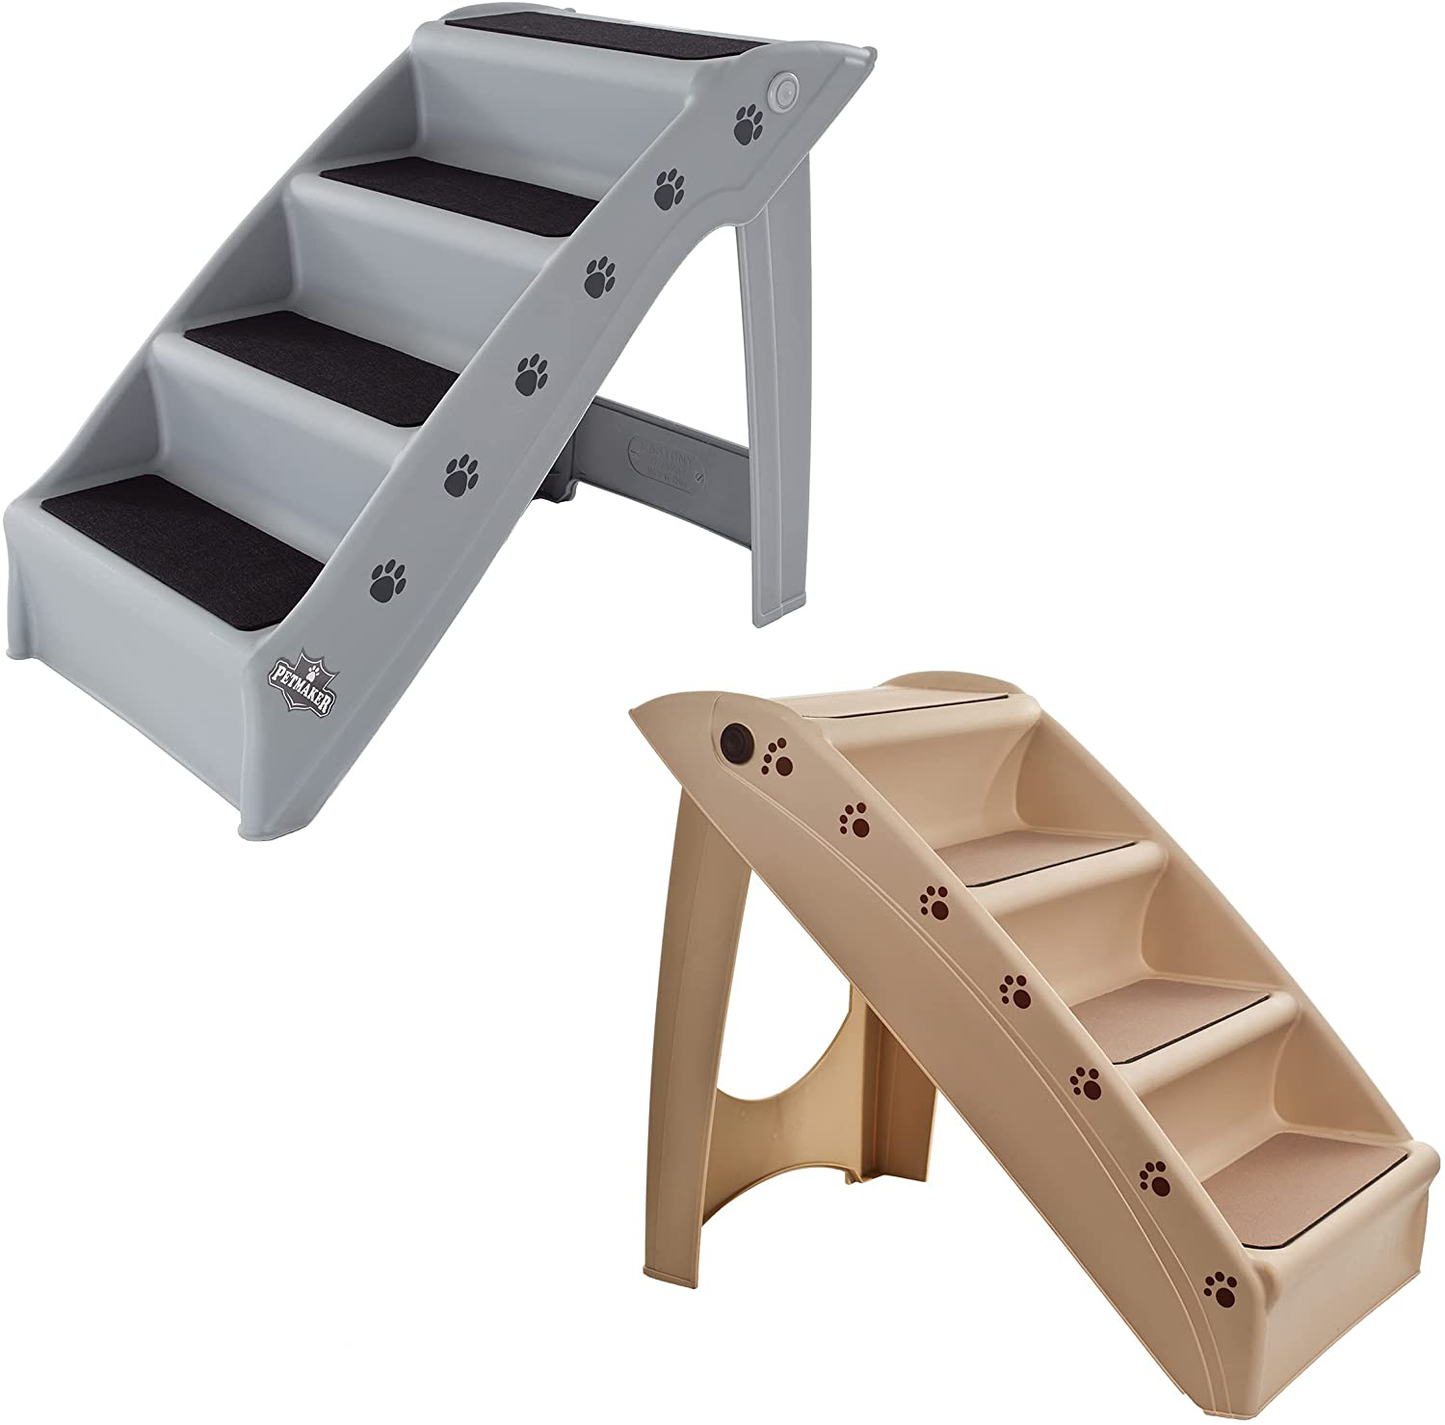 PETMAKER Folding Plastic Pet Stairs Collection - Durable Indoor/Outdoor 4 Step Design with Built-In Safety Features, Home or Travel, for Dogs and Cats Animals & Pet Supplies > Pet Supplies > Cat Supplies > Cat Beds PETMAKER   